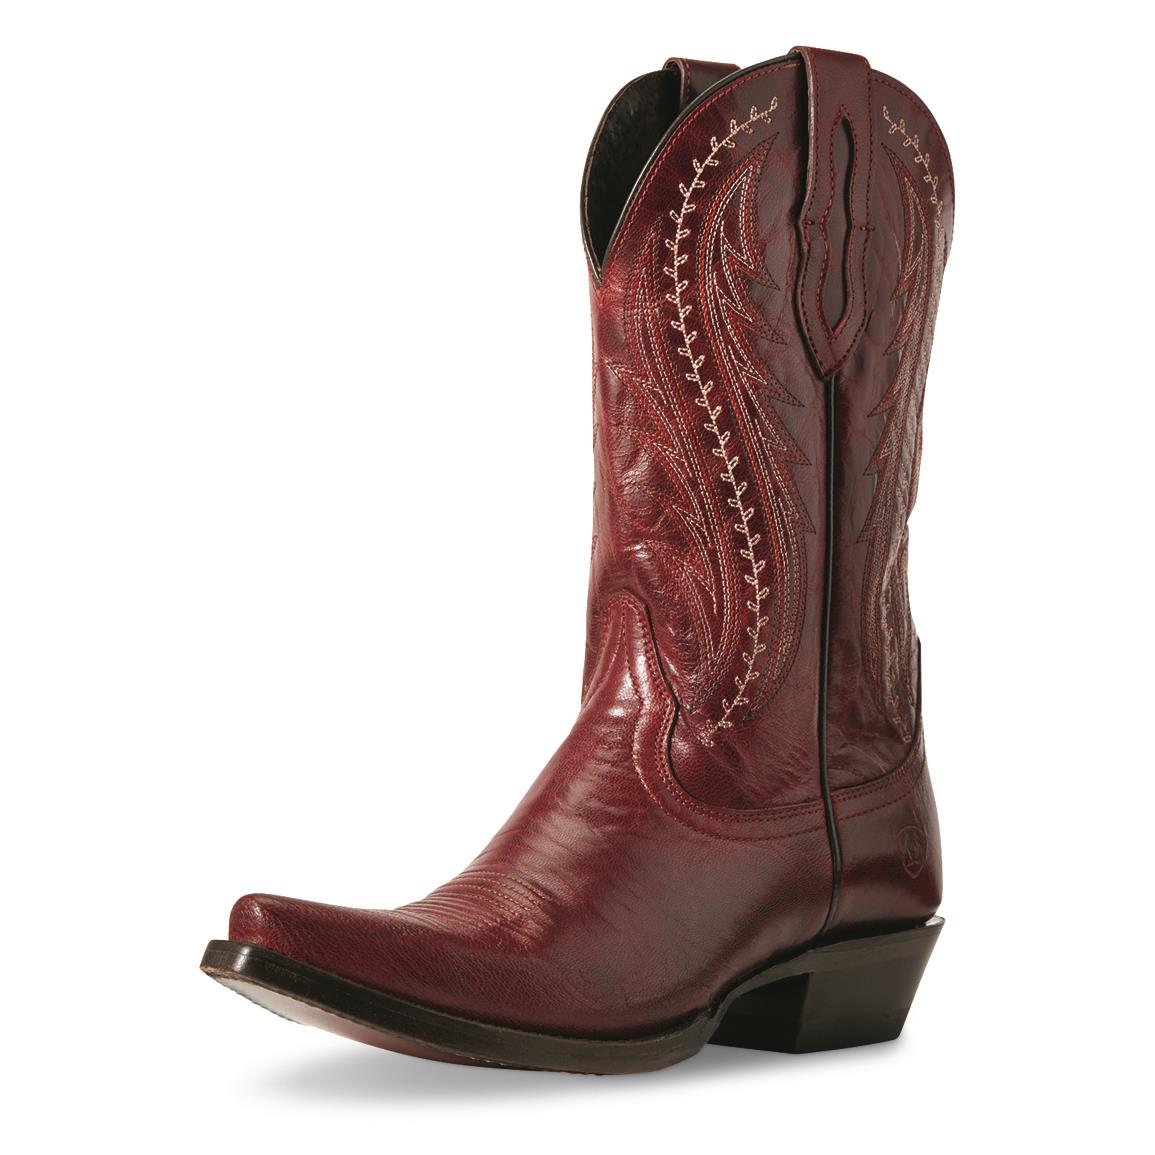 Ariat Women's Tailgate Western Boots